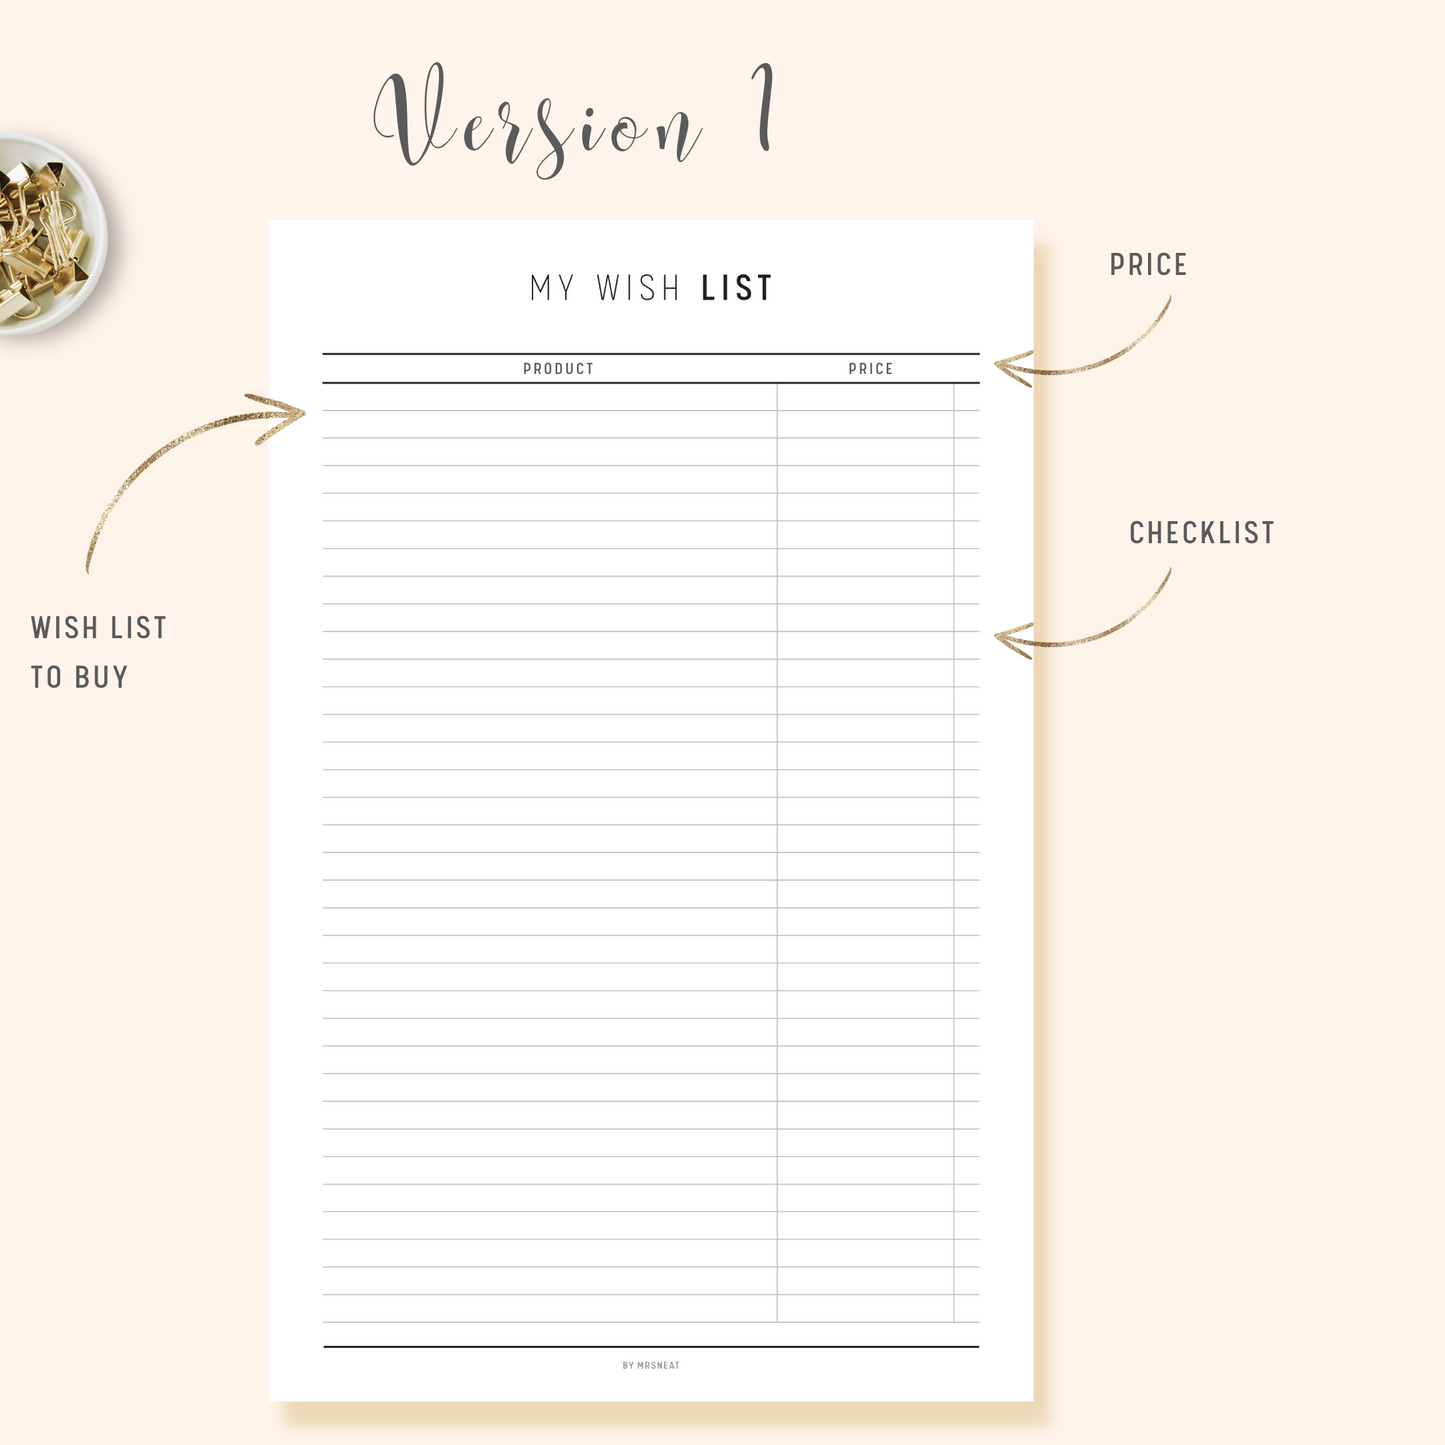 Wish List Planner with room for Product list to Buy, Price and Checklist column